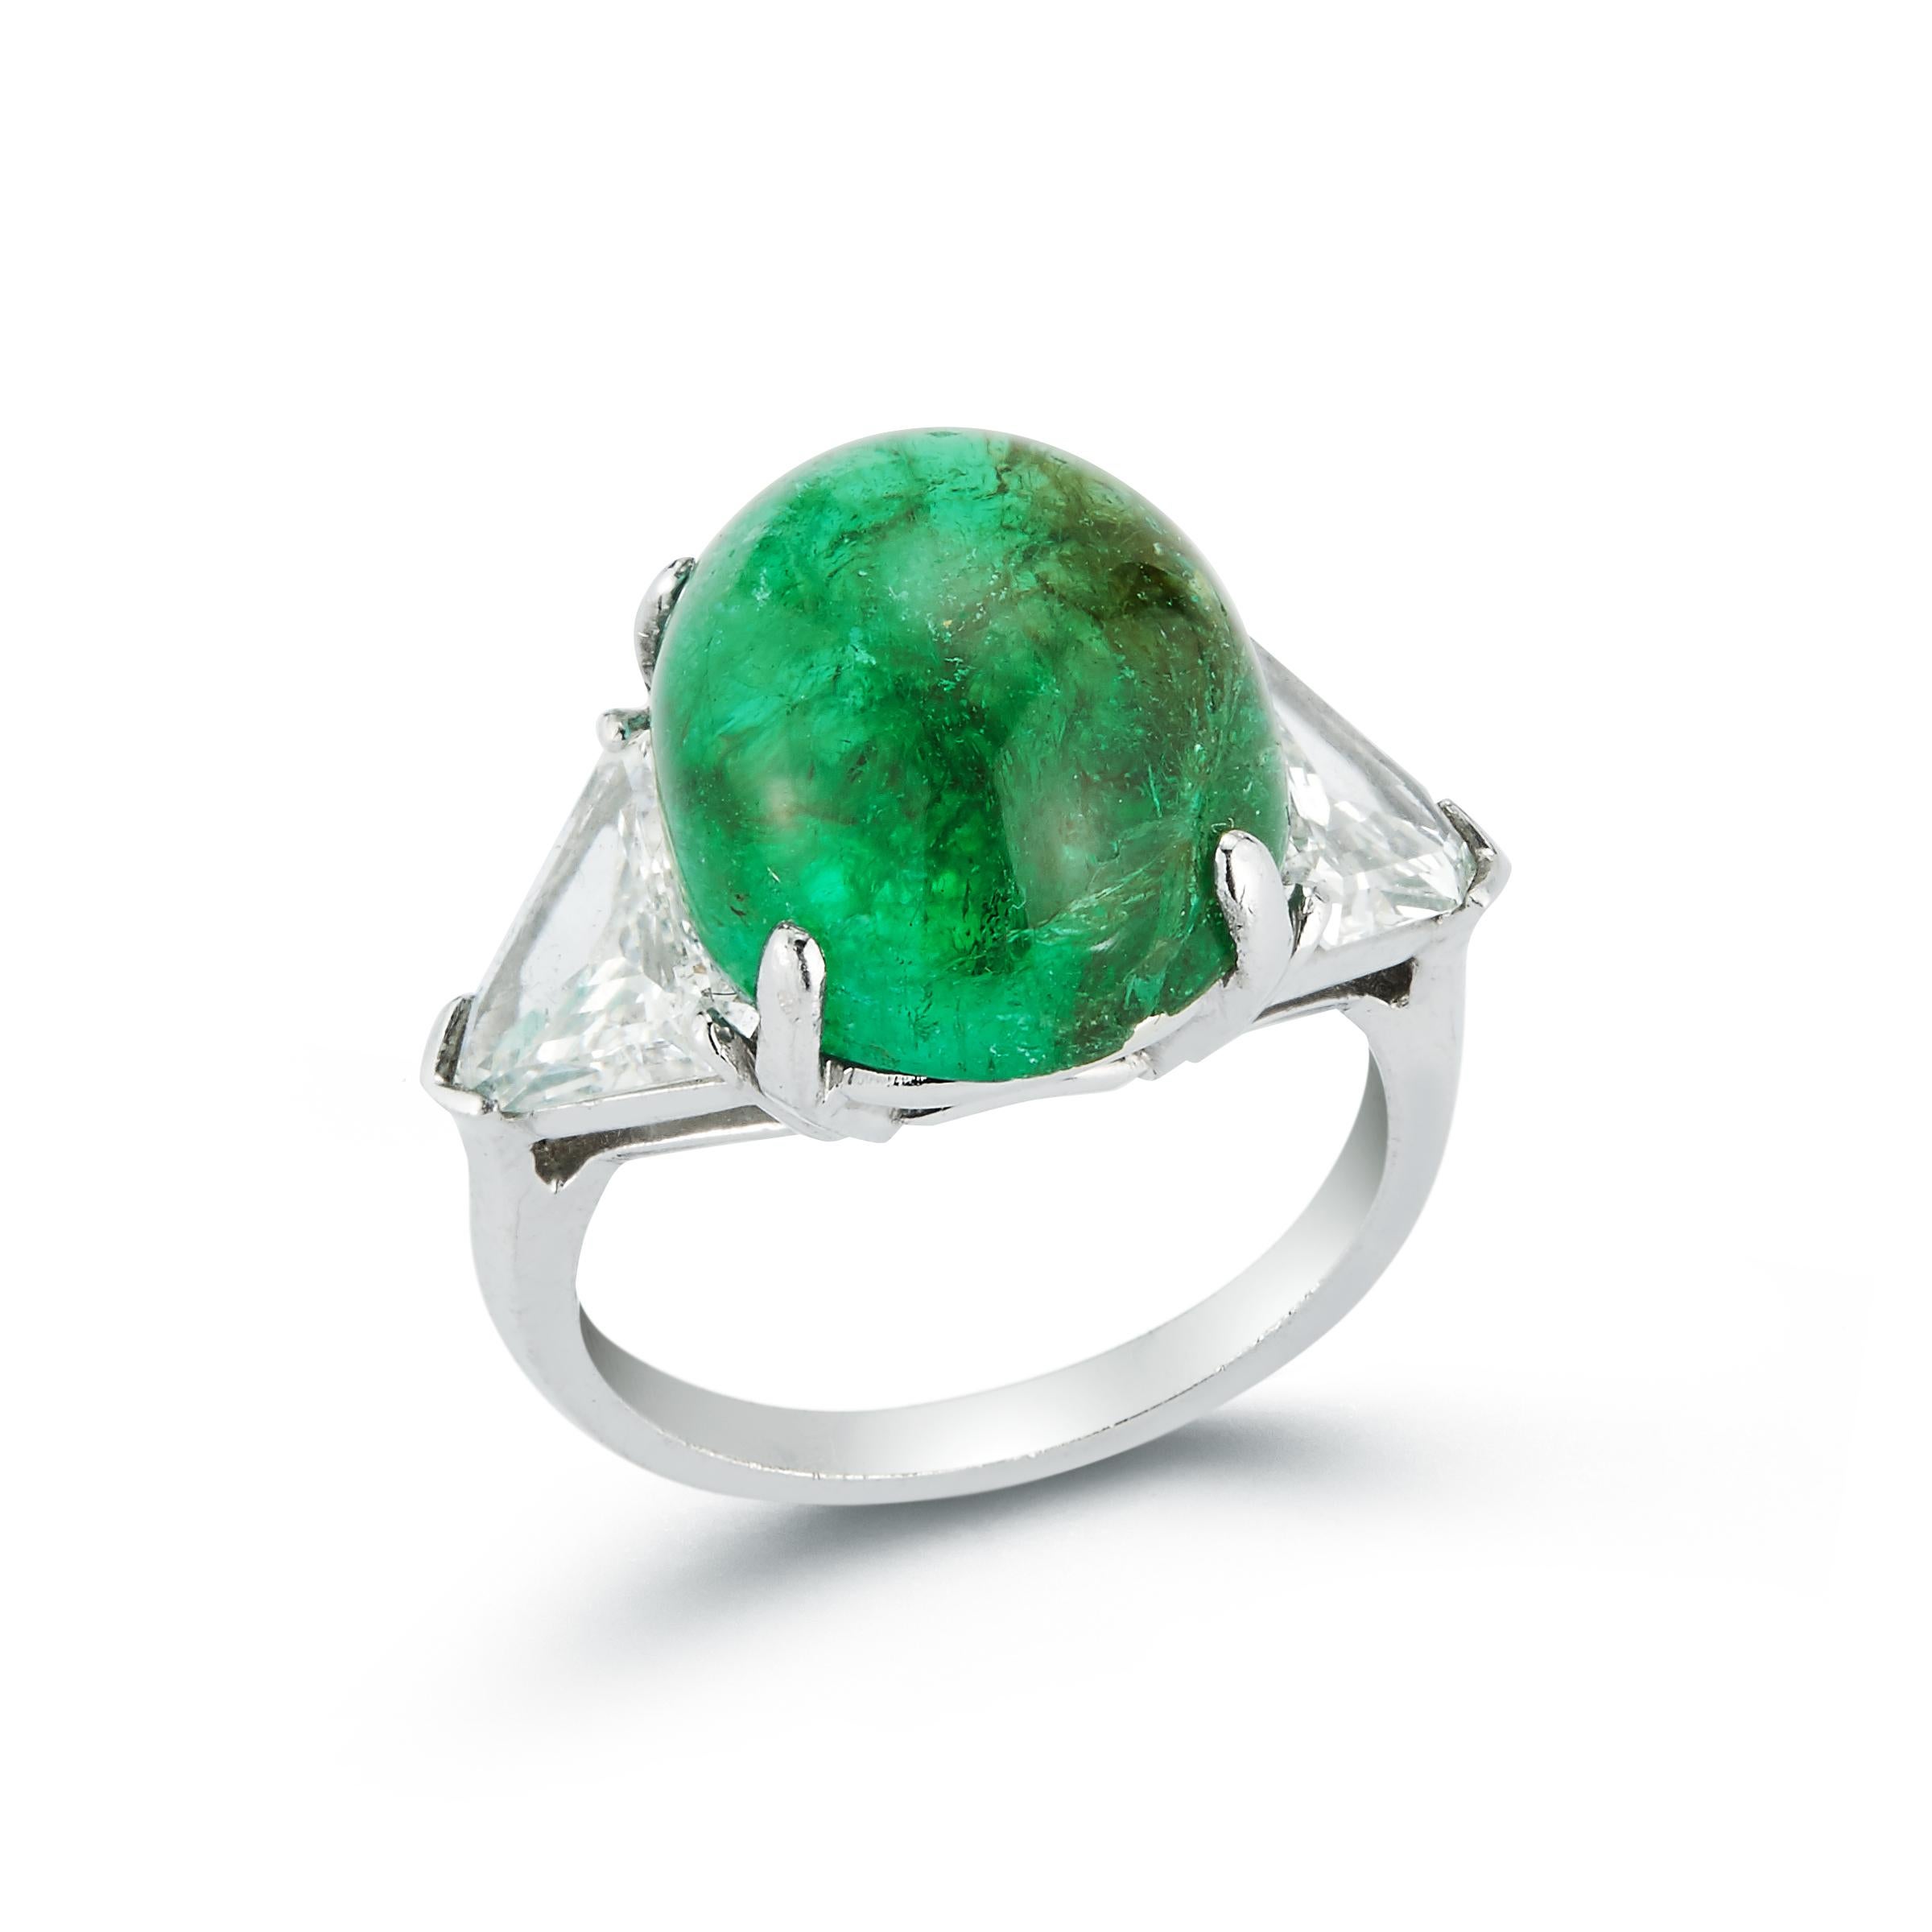 Cabochon Colombian Emerald & Diamond Three Stone Ring set in platinum AGL Certified
Emerald Weight: 12.30 cts
Ring Size: 6
Re-sizable to any size free of charge 
